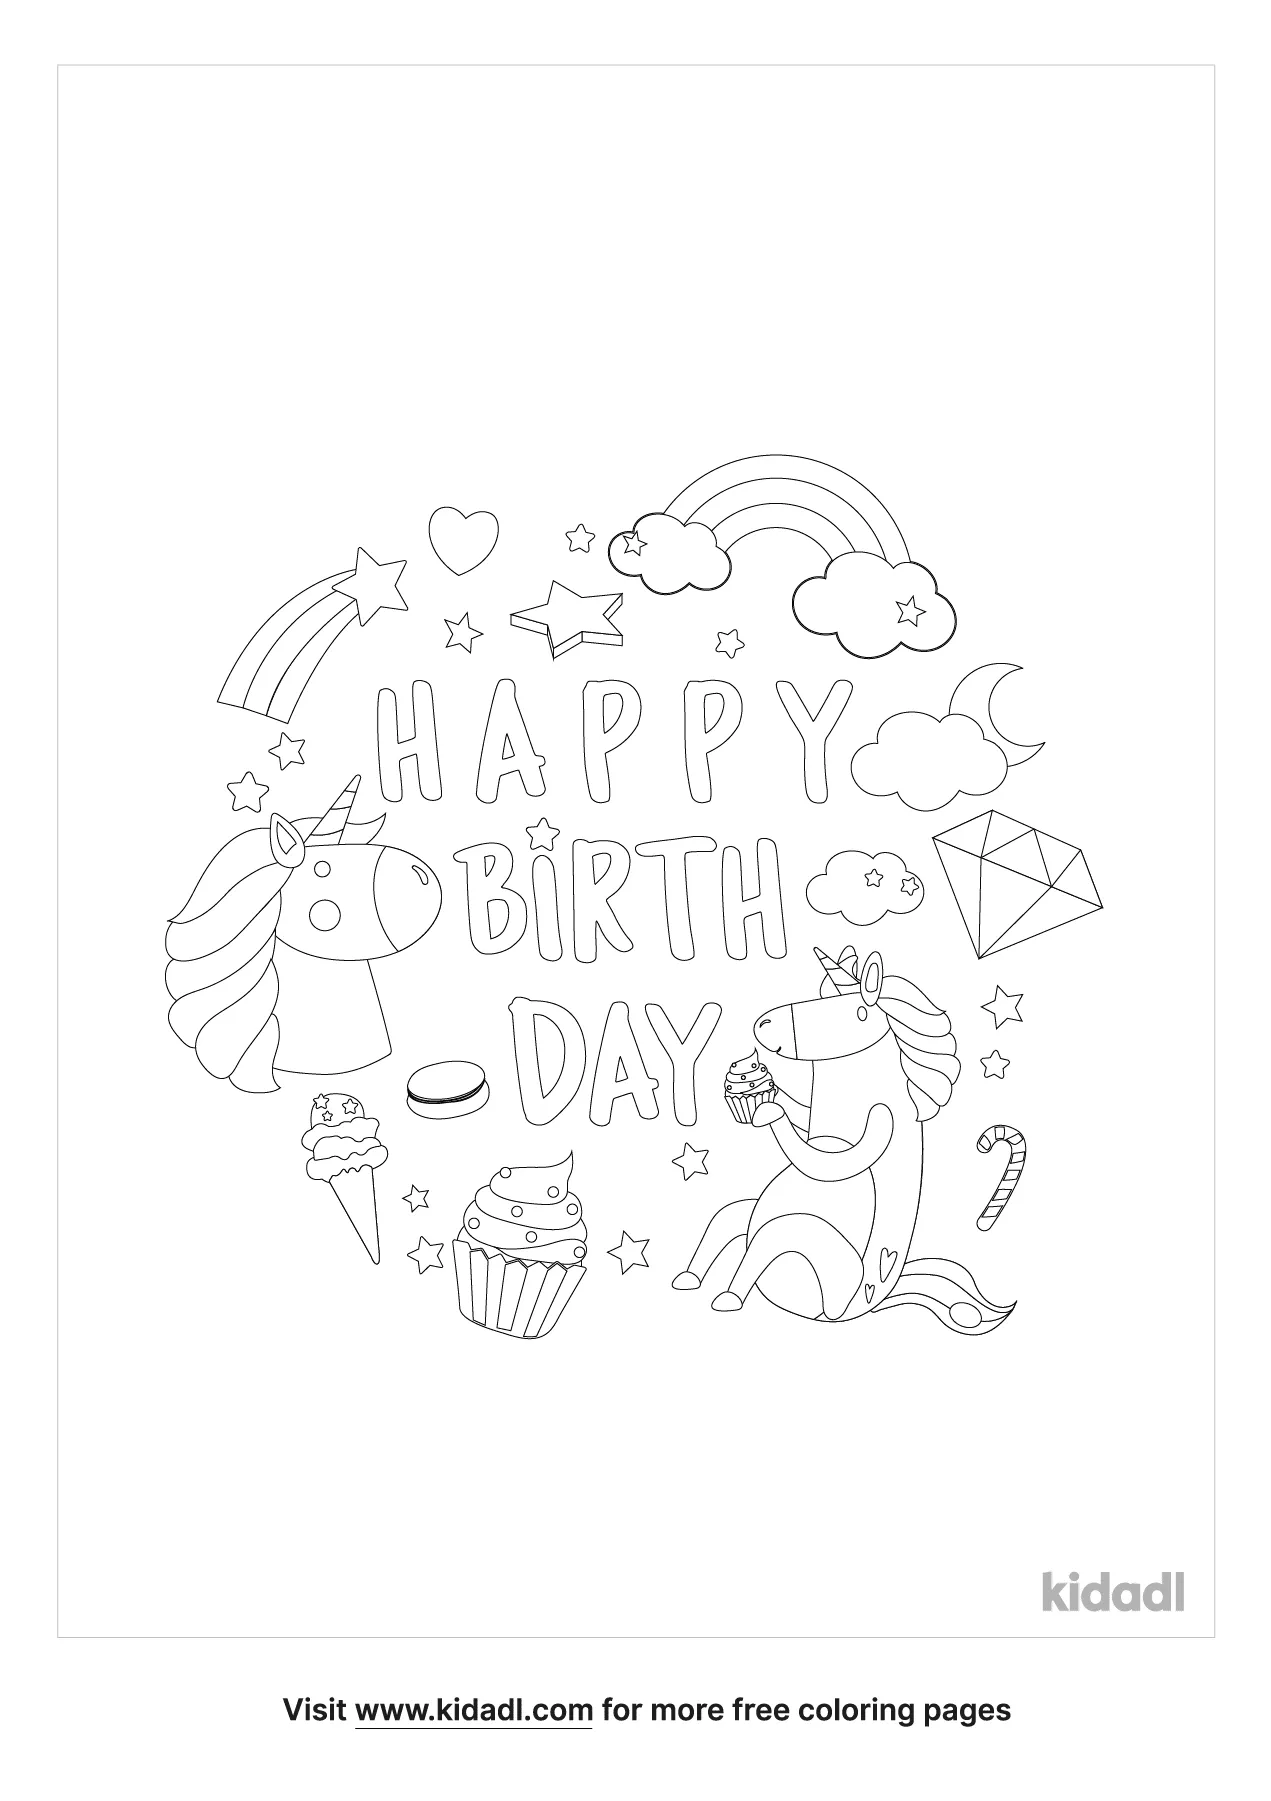 Free happy birthday horse coloring page coloring page printables